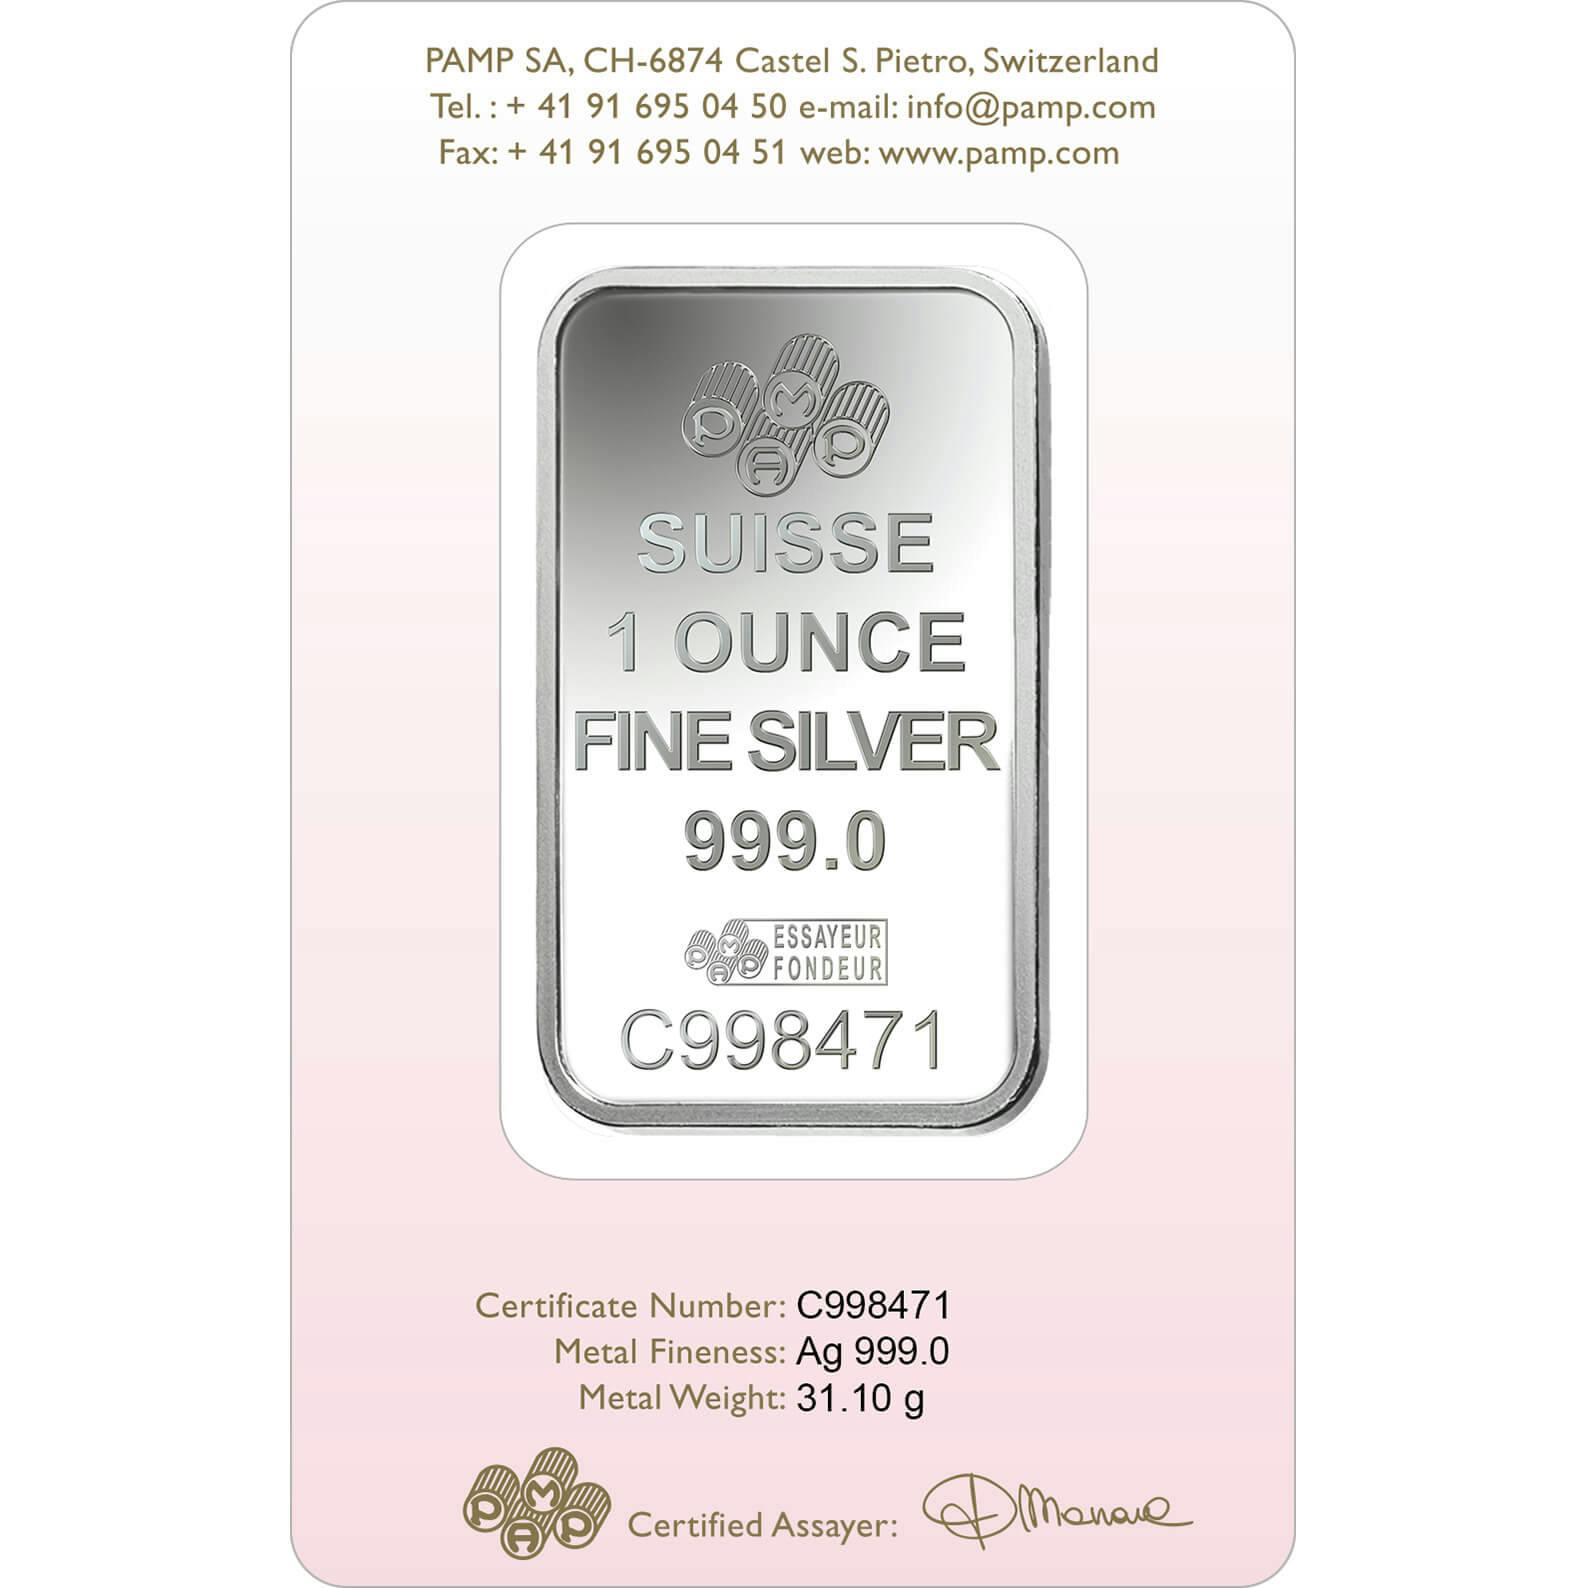 Invest in 1 oz Fine Silver Love Always - PAMP Swiss - Back